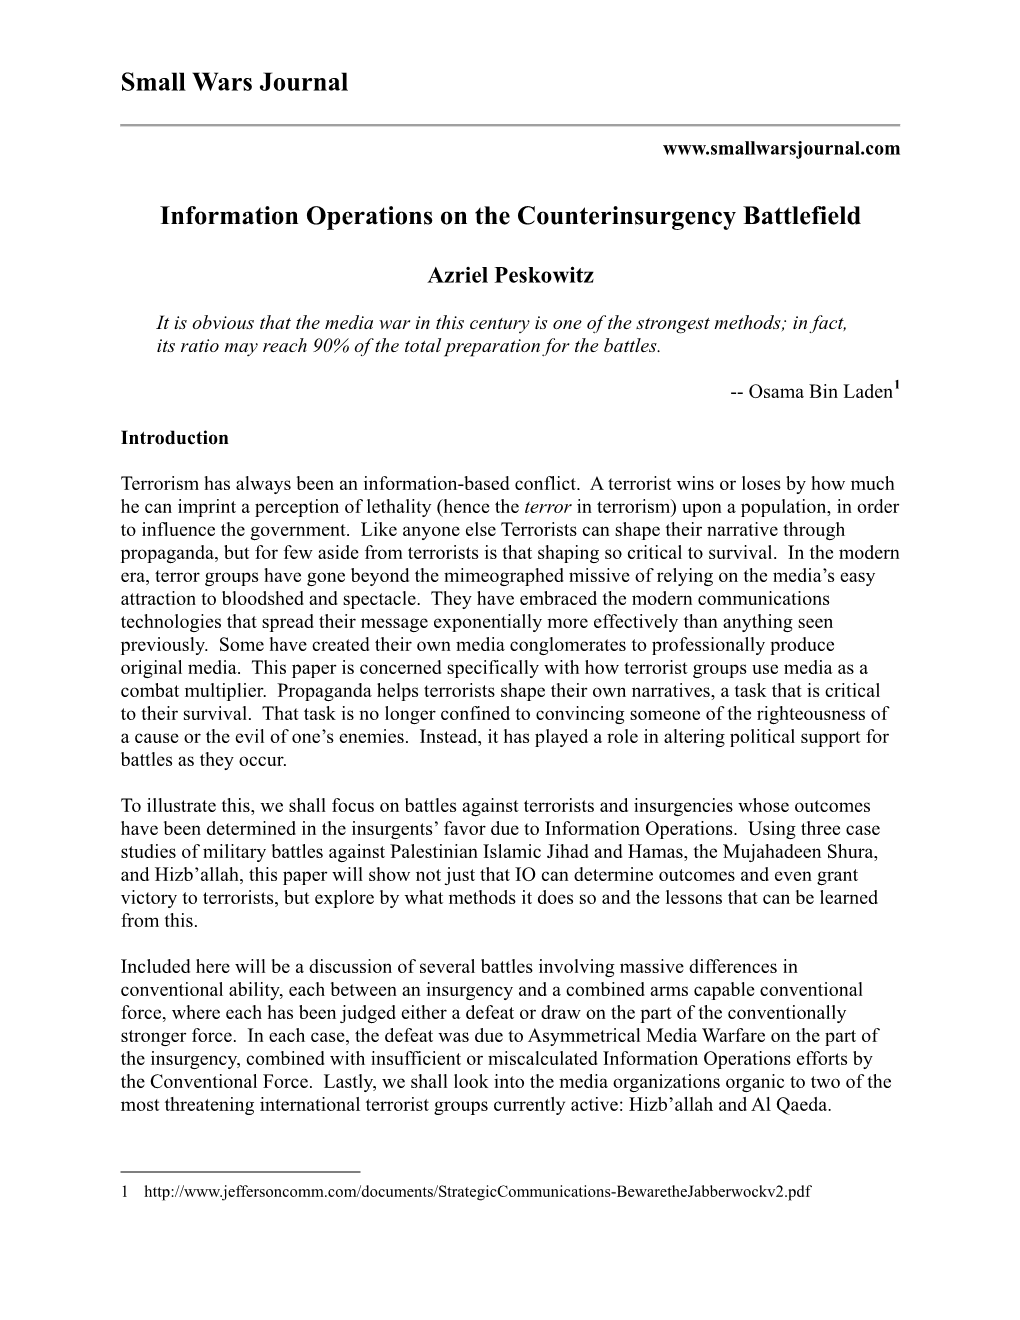 Small Wars Journal Information Operations on The